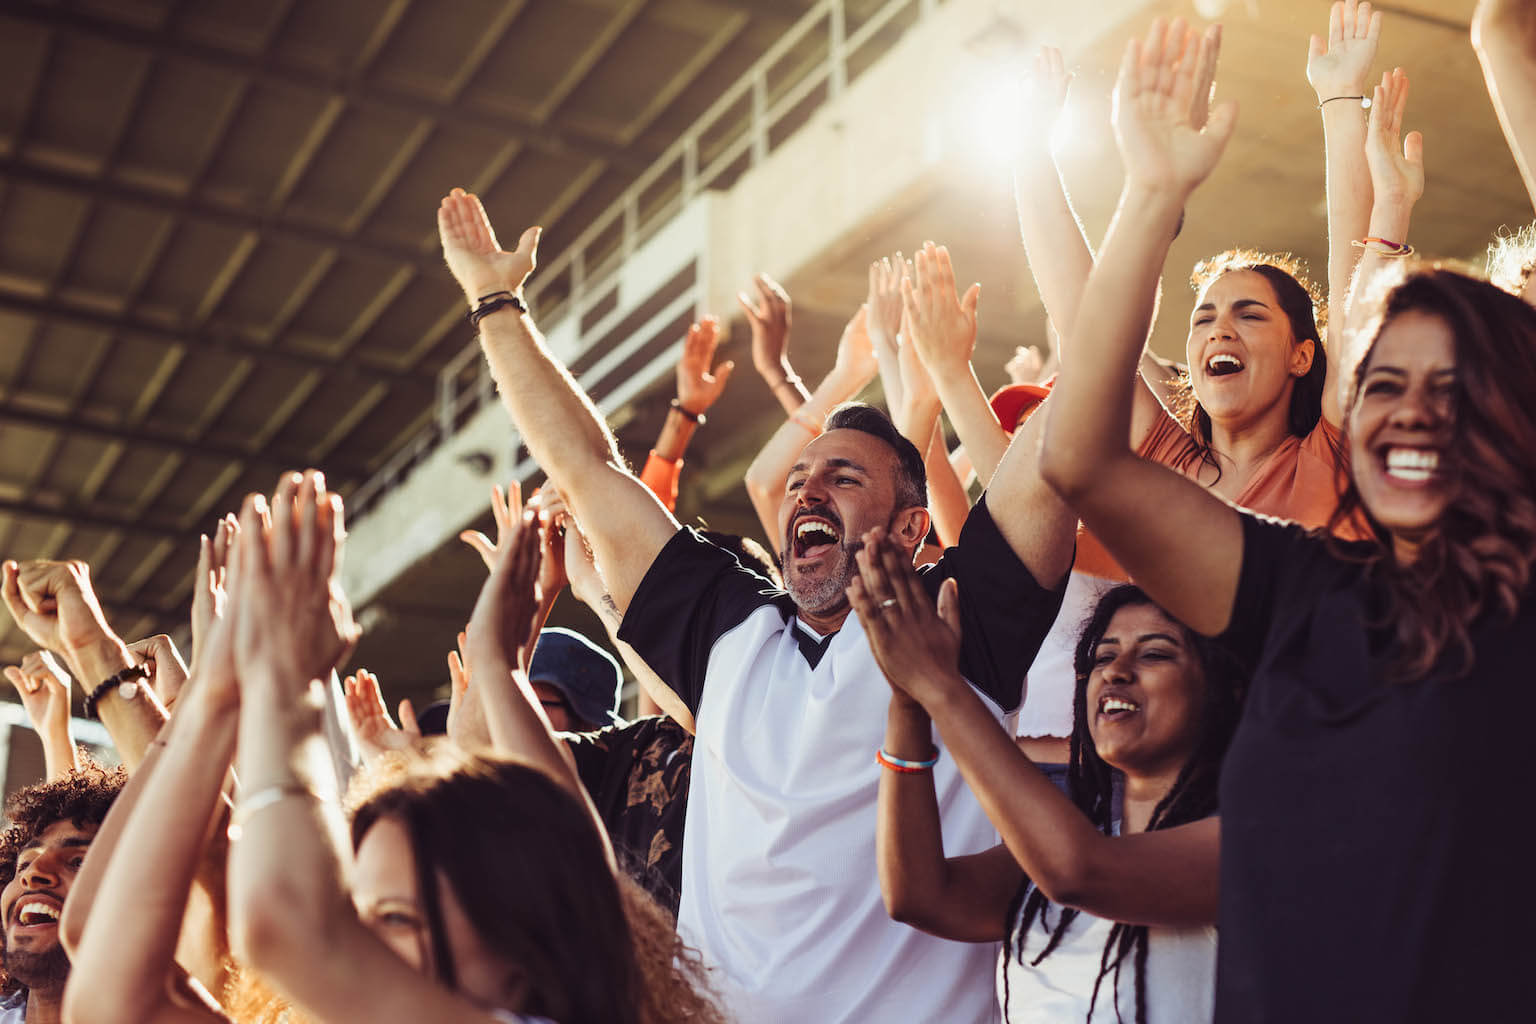 Parents enthusiastically cheering for their children during a soccer match in a stadium